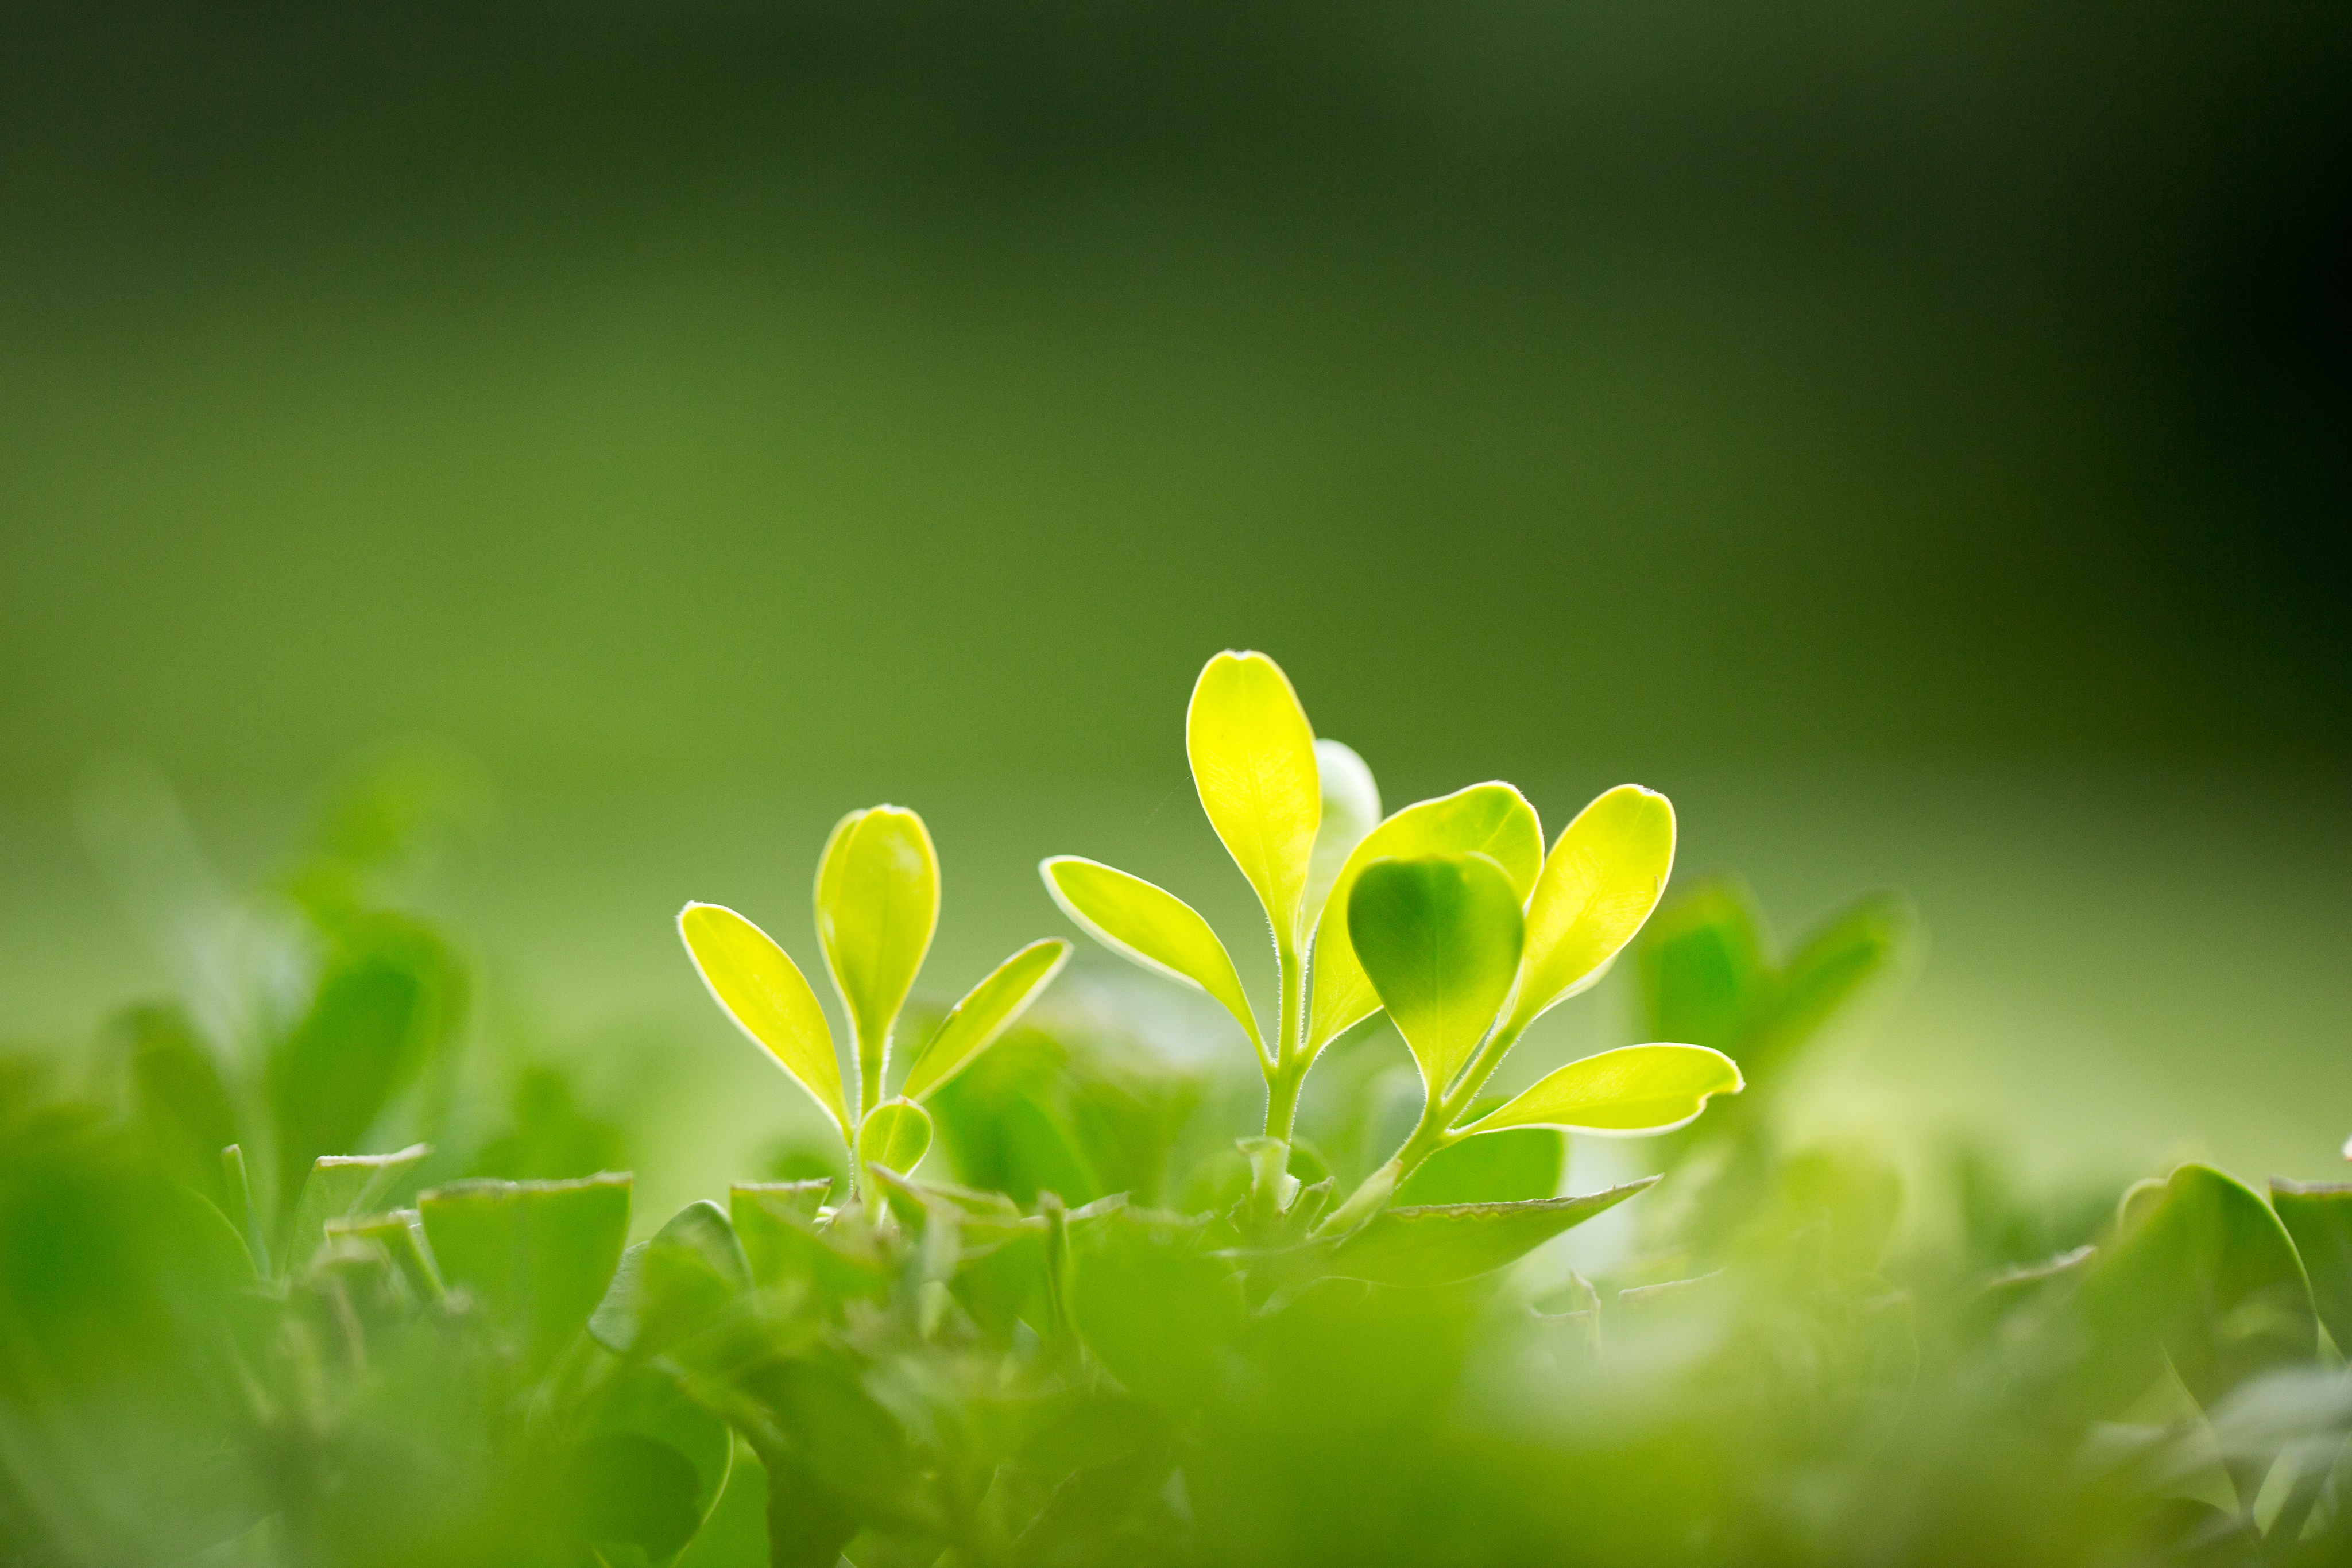 Leaf Macro Sprout Plant Greenery 4096x2731